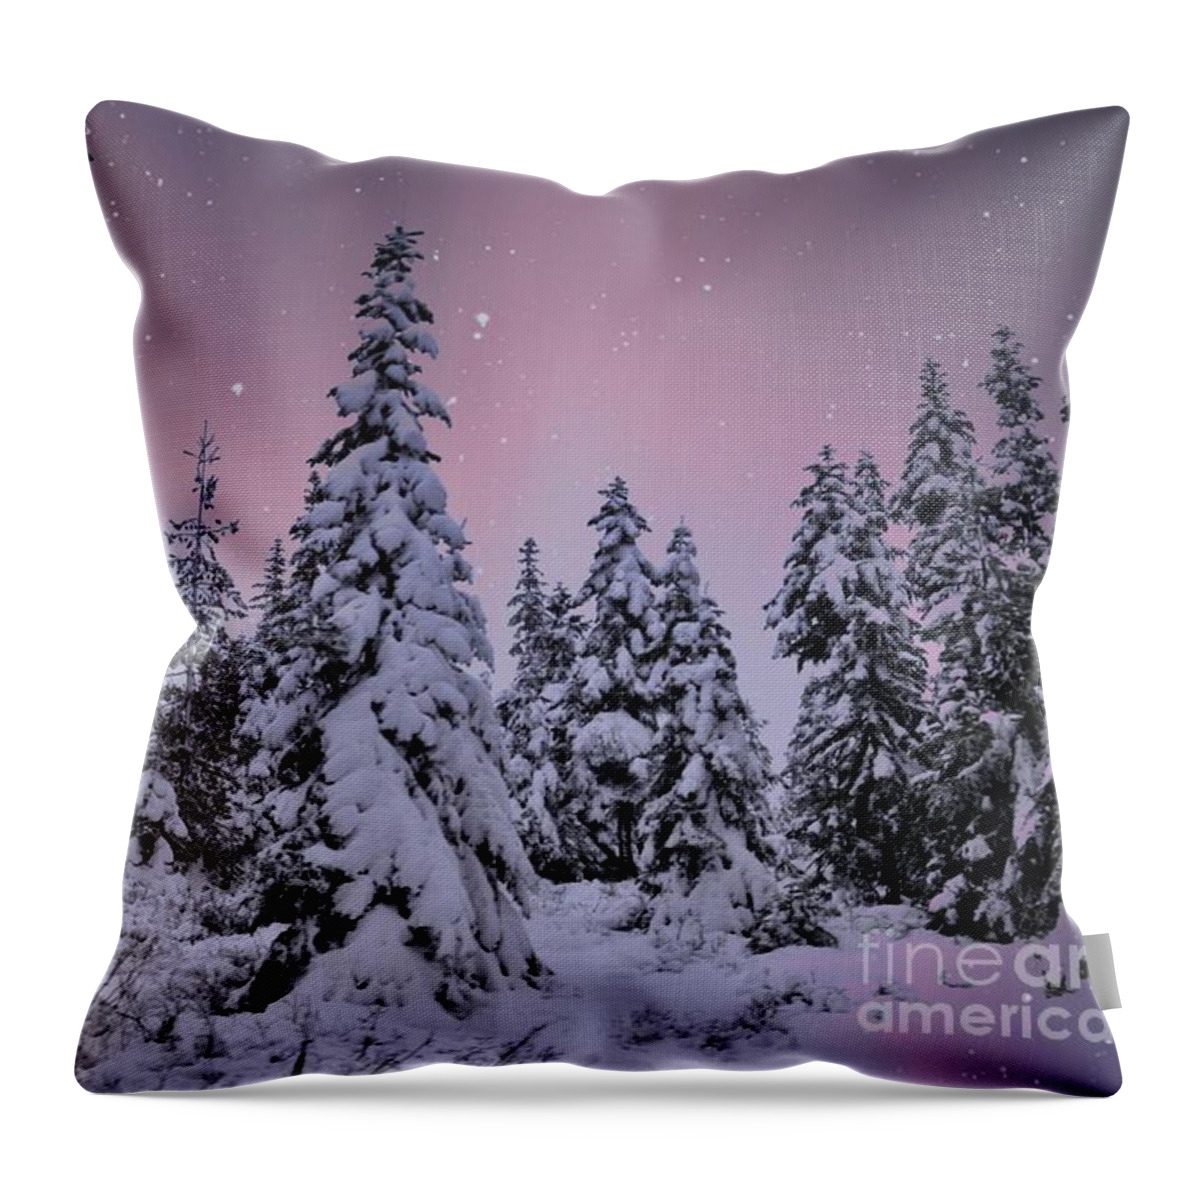 Landscape Throw Pillow featuring the photograph Winter Beauty by Sheila Ping